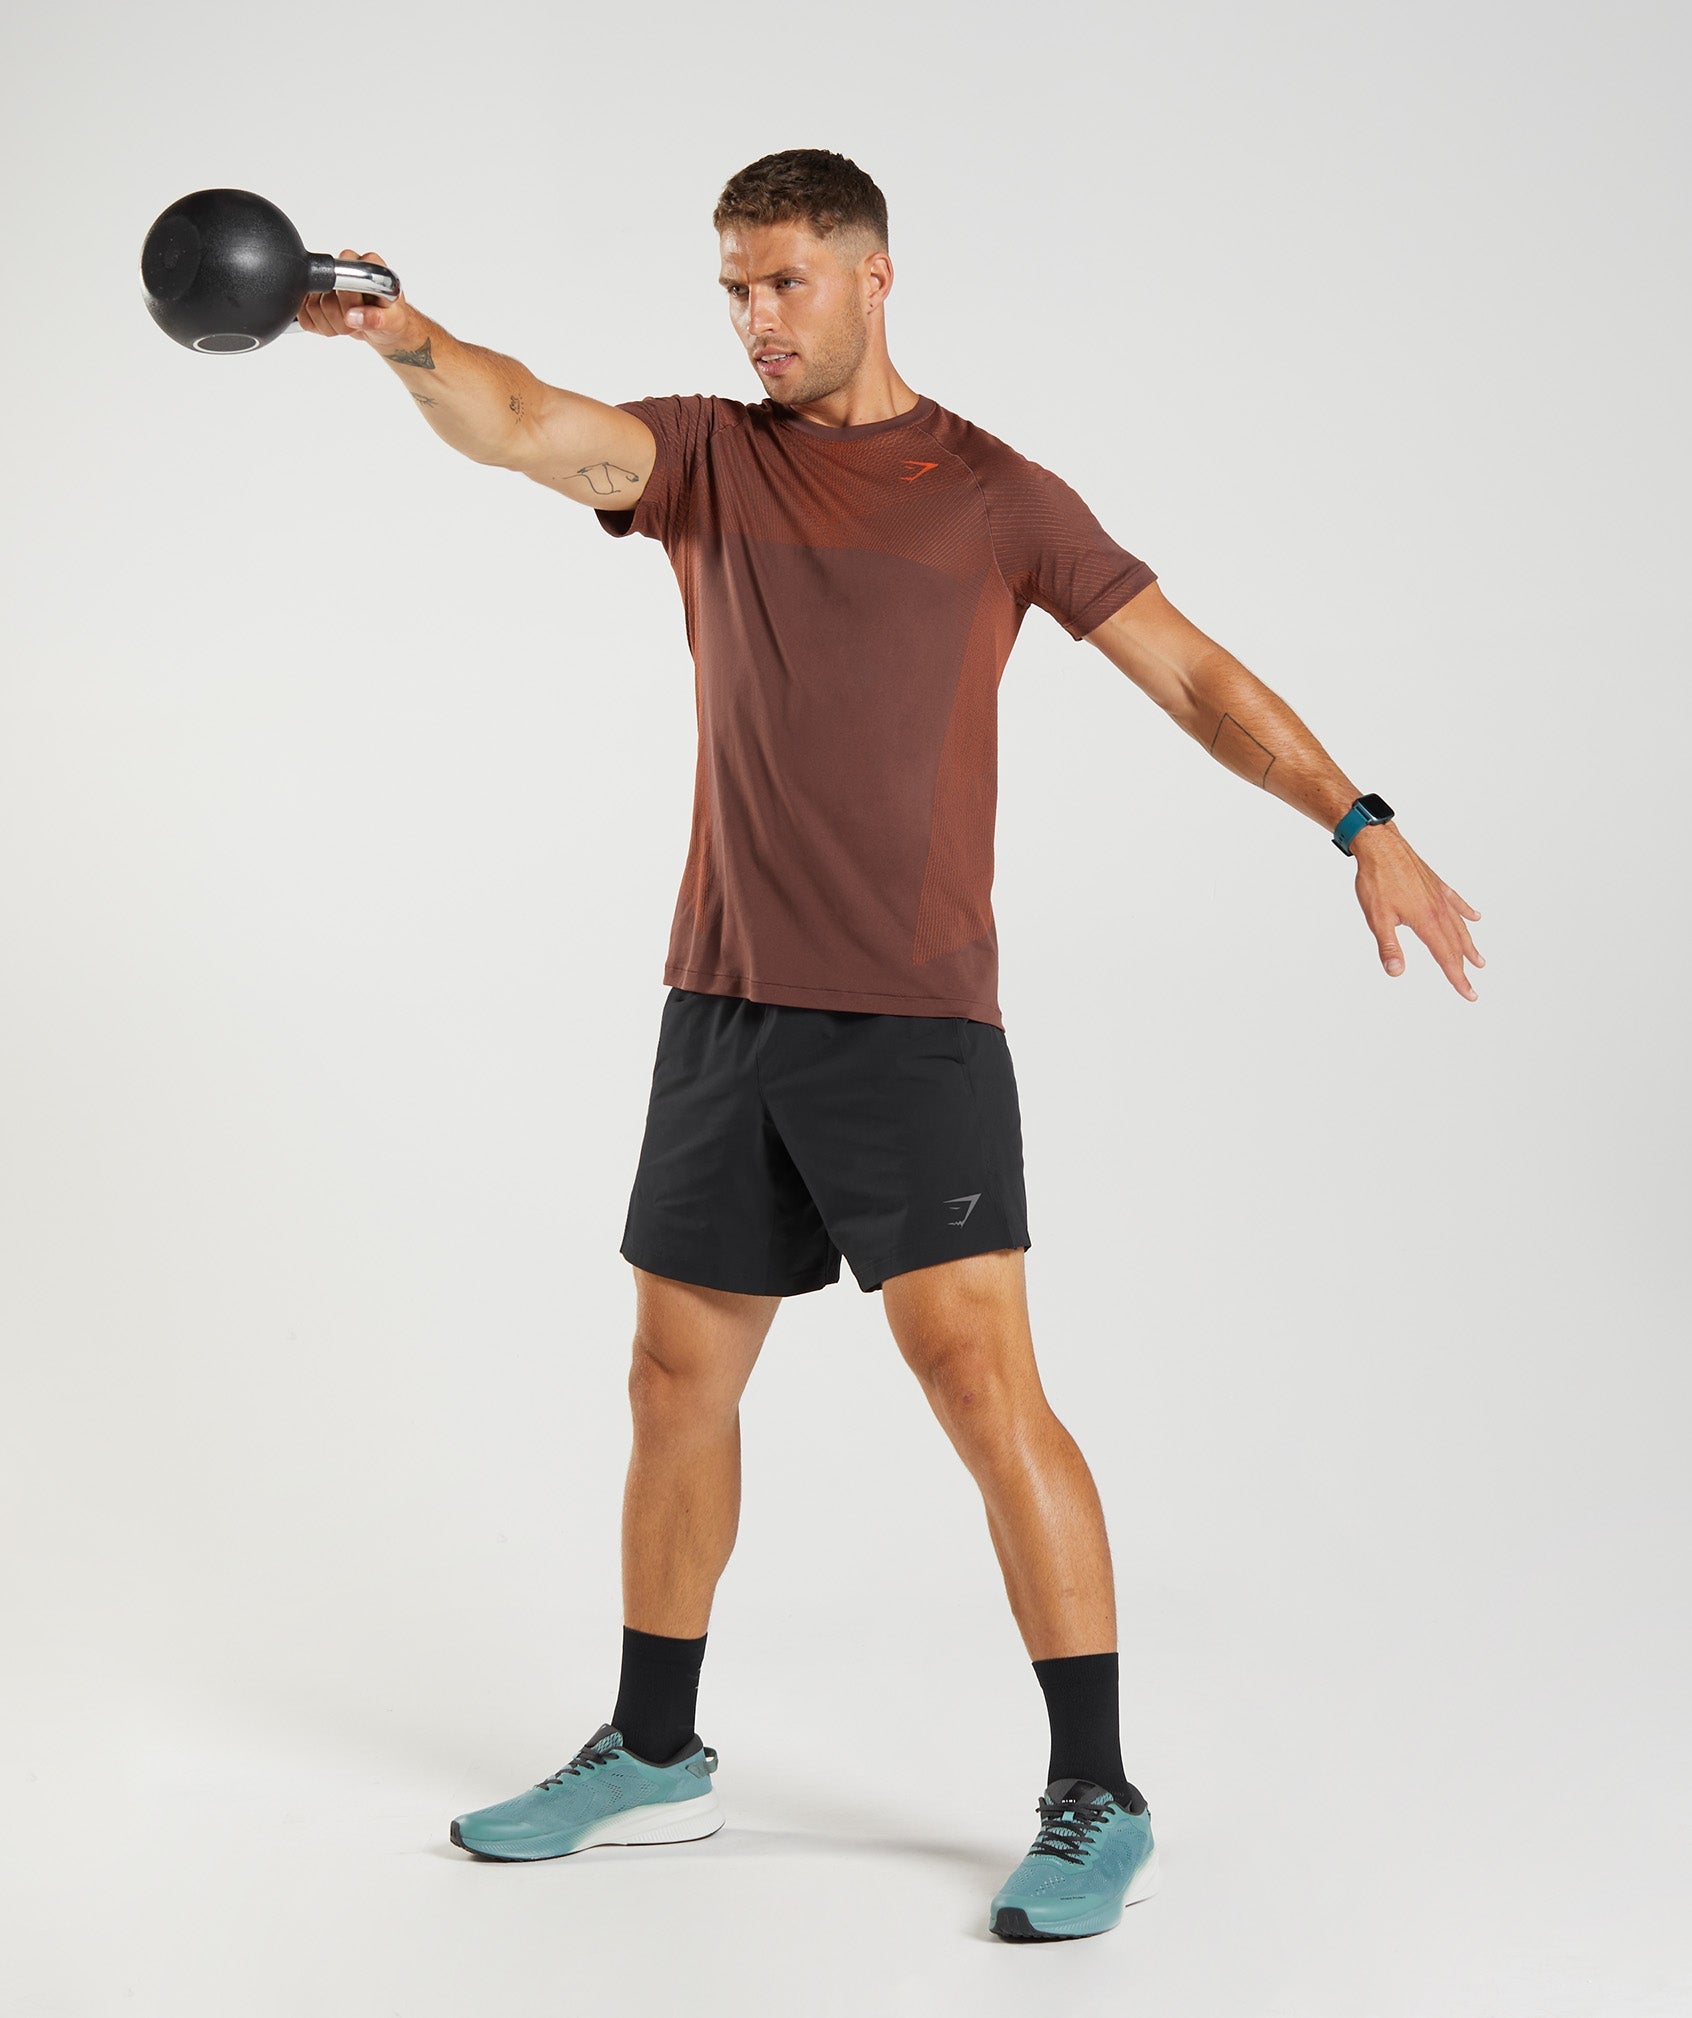 Apex Seamless T-Shirt in Cherry Brown/Pepper Red - view 4